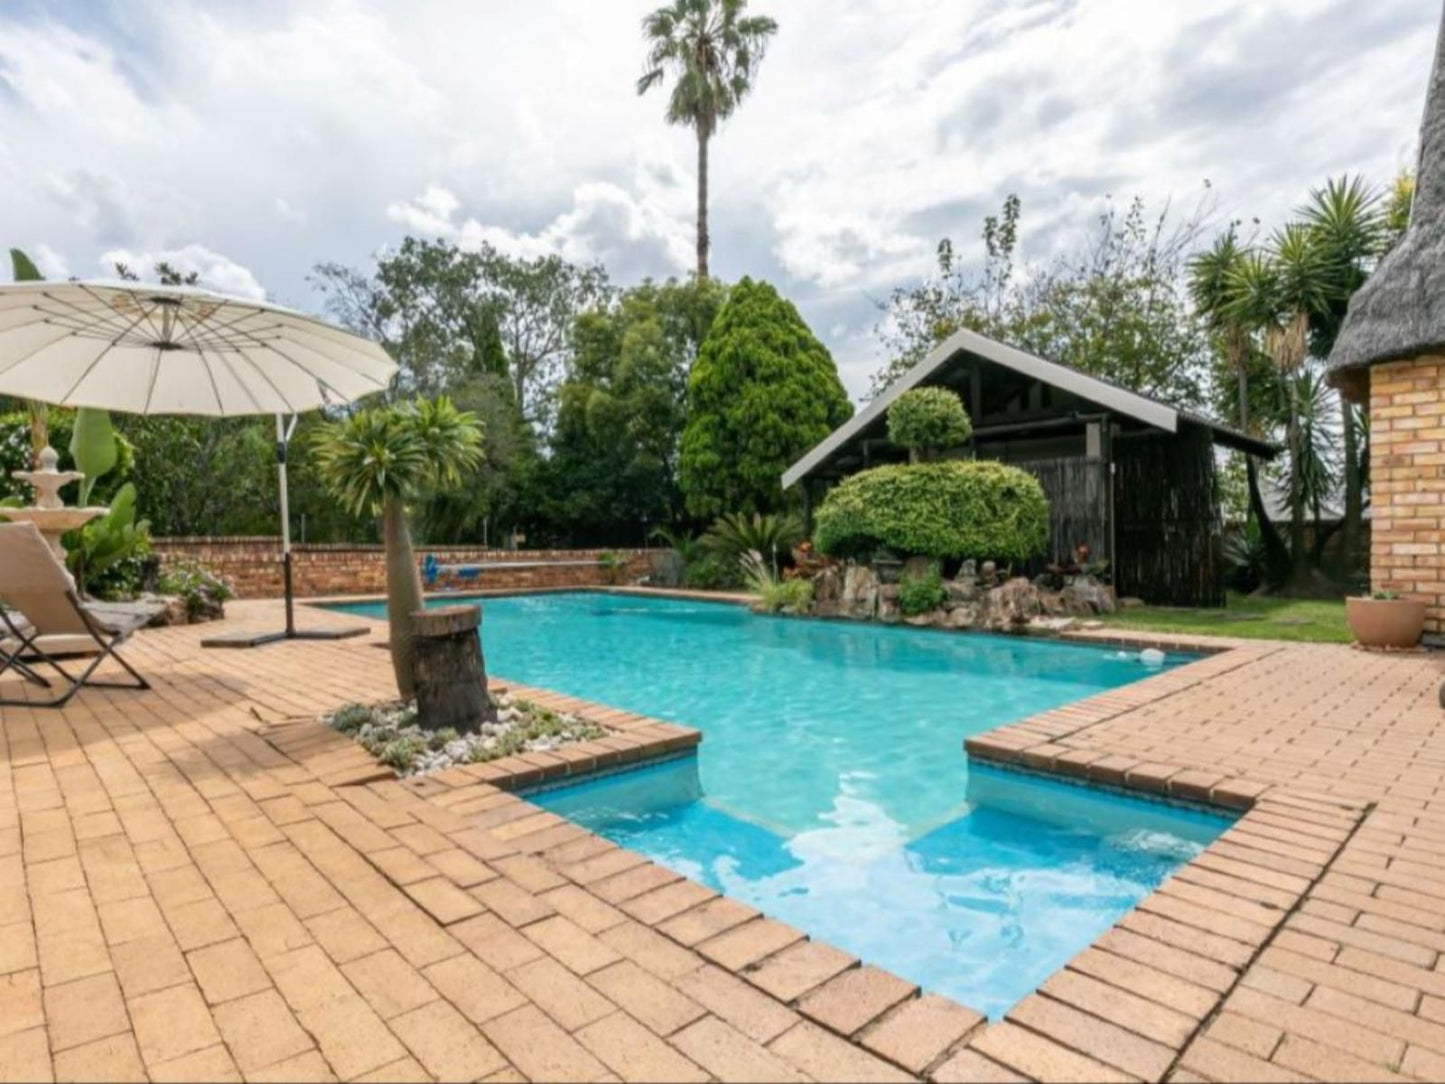 New Eden Suites Norscot Manor Johannesburg Gauteng South Africa Palm Tree, Plant, Nature, Wood, Garden, Swimming Pool